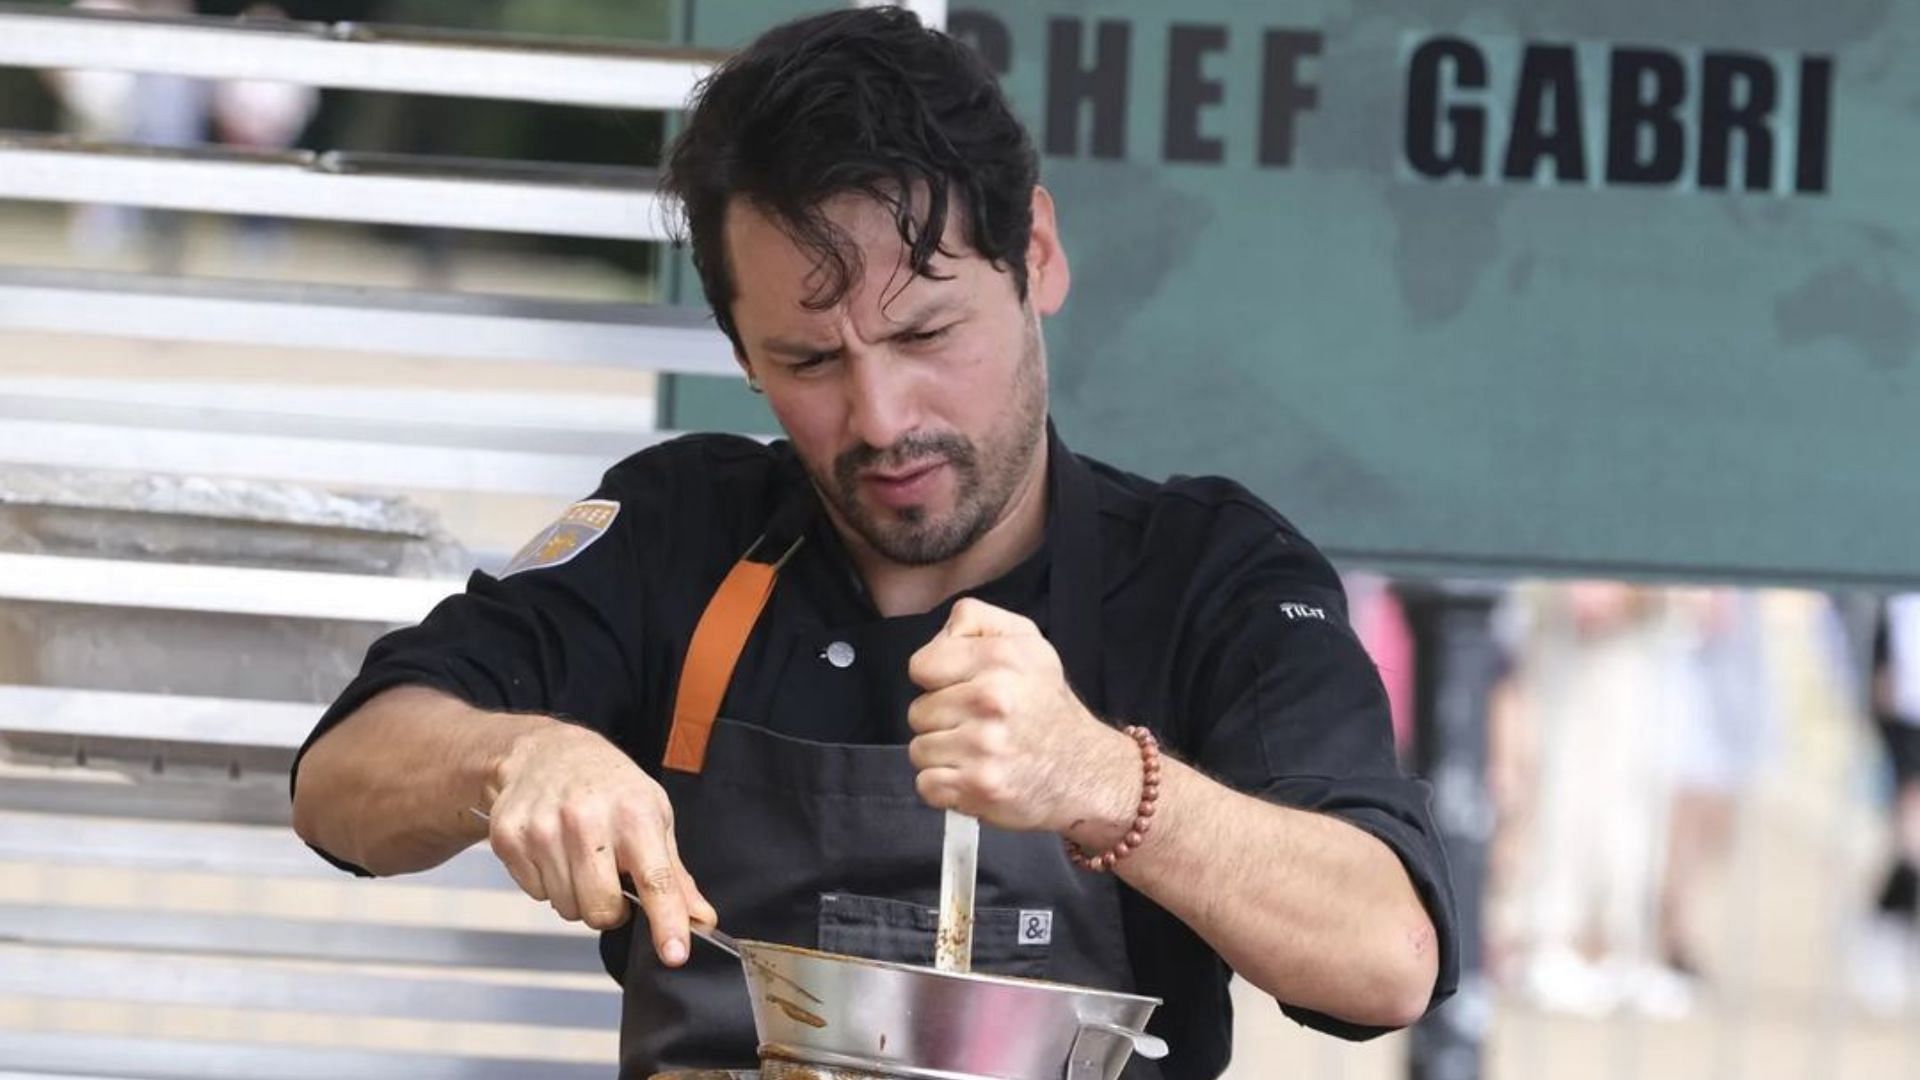 Gabri is among the Top 6 on Top Chef